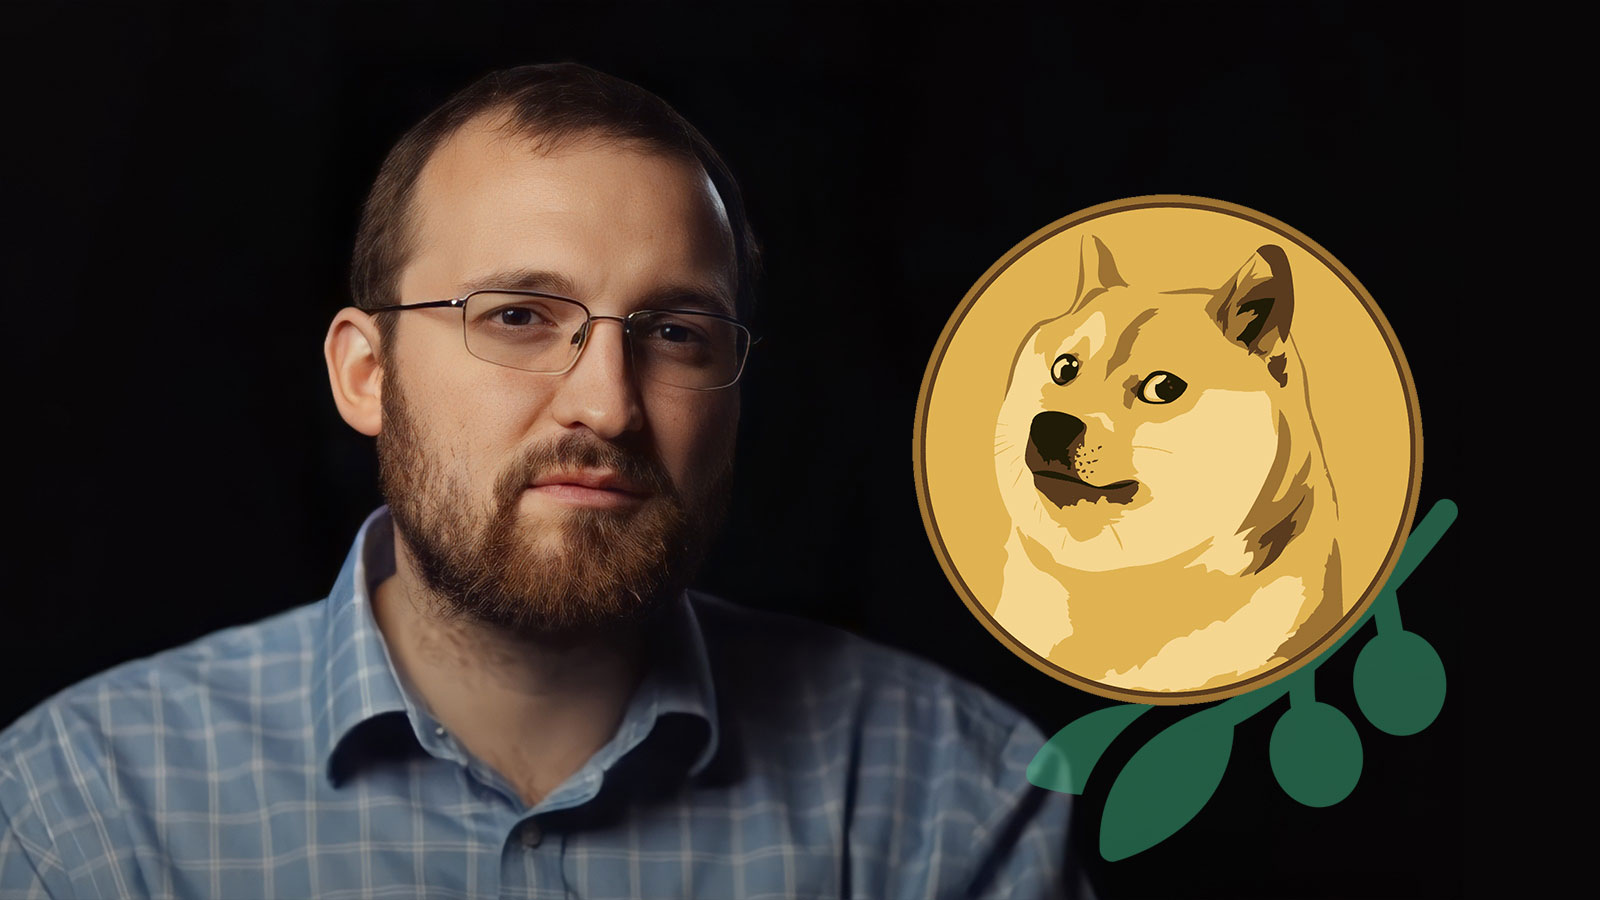 Dogecoin Cofounder Hands the Olive Branch to Cardano’s Charles Hoskinson